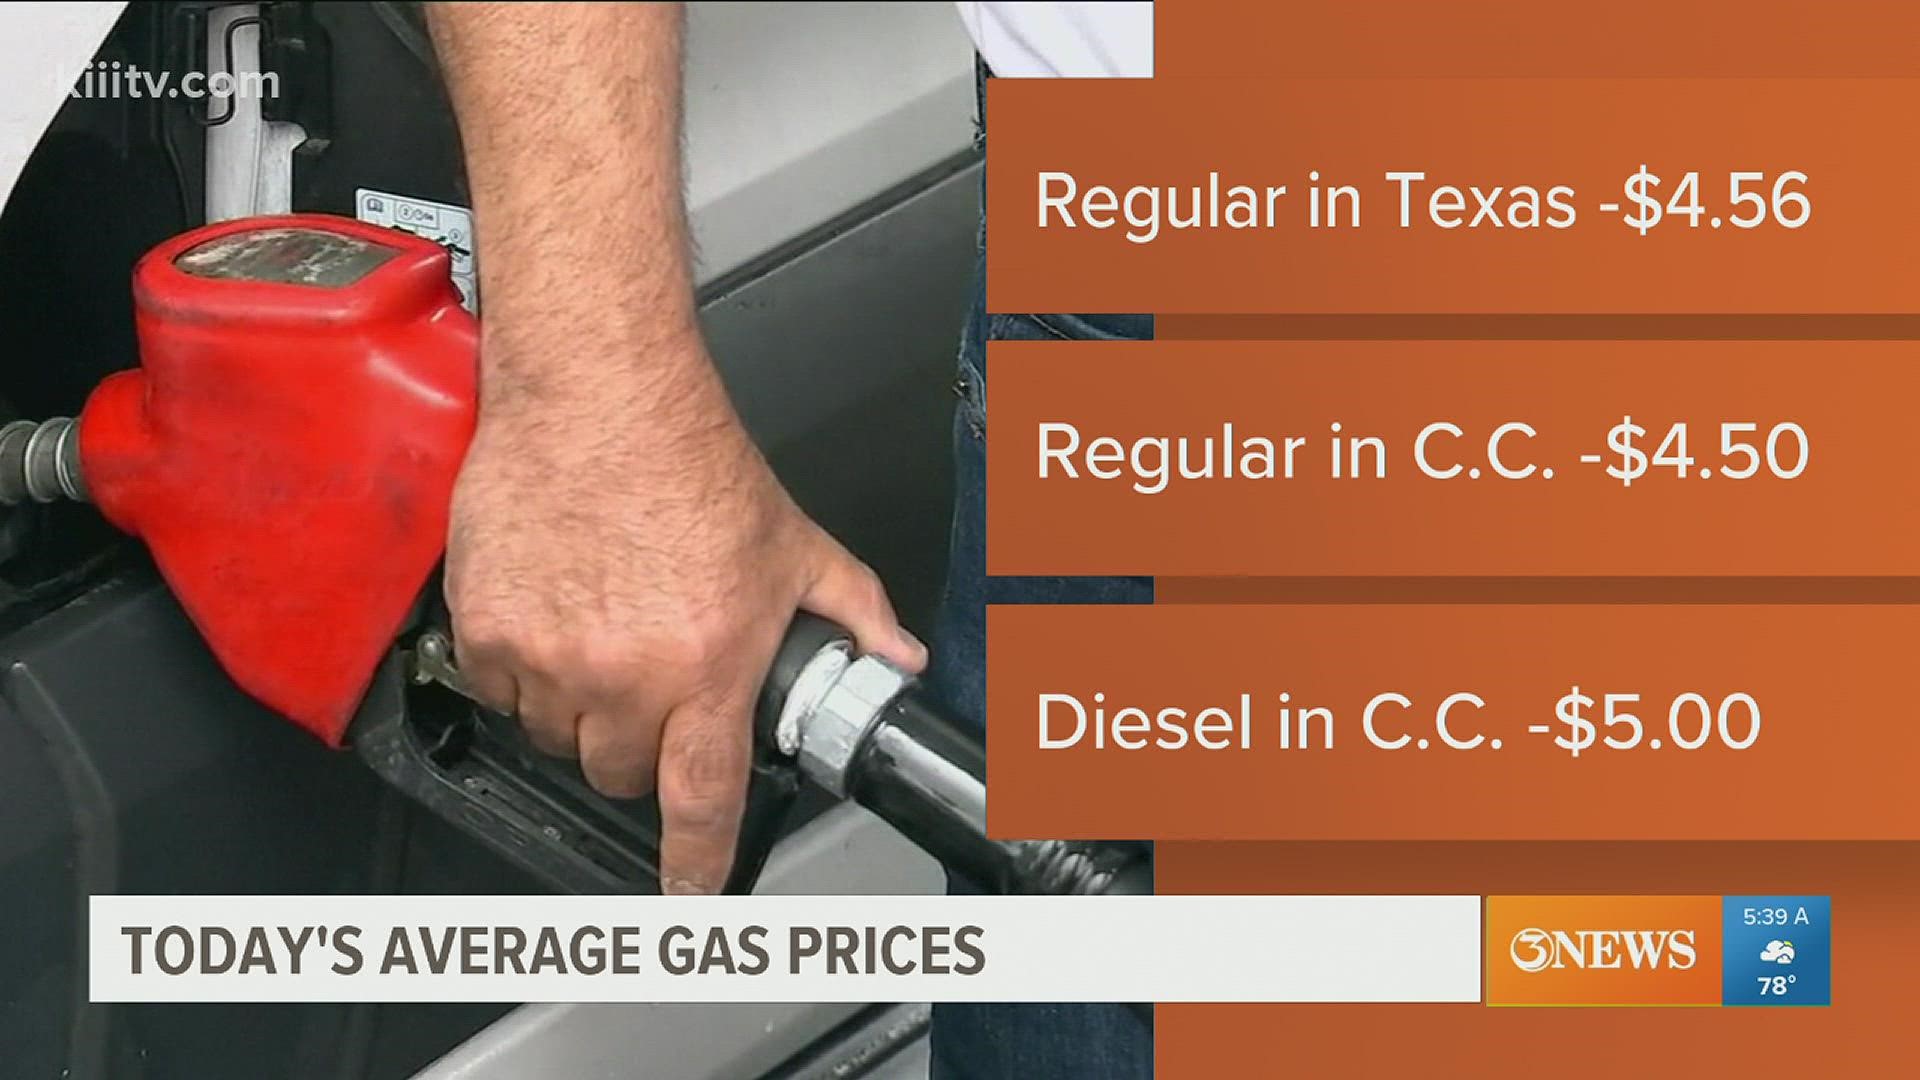 Corpus Christi hit another record for regular unleaded at $4.50 a gallon.